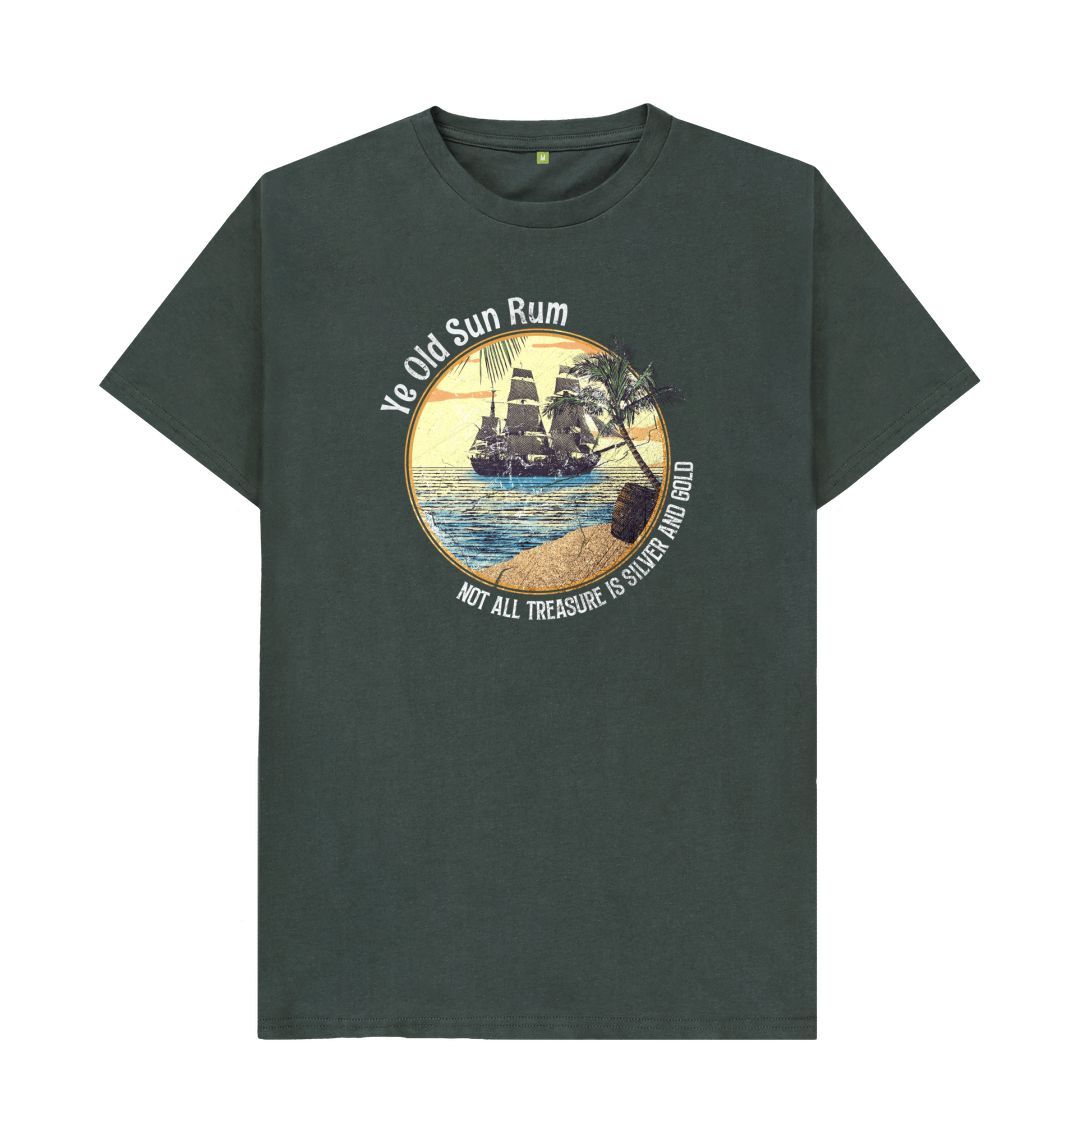 Dark Grey Mens Tee - Old Sun Rum - Not all Treasure is Silver and Gold